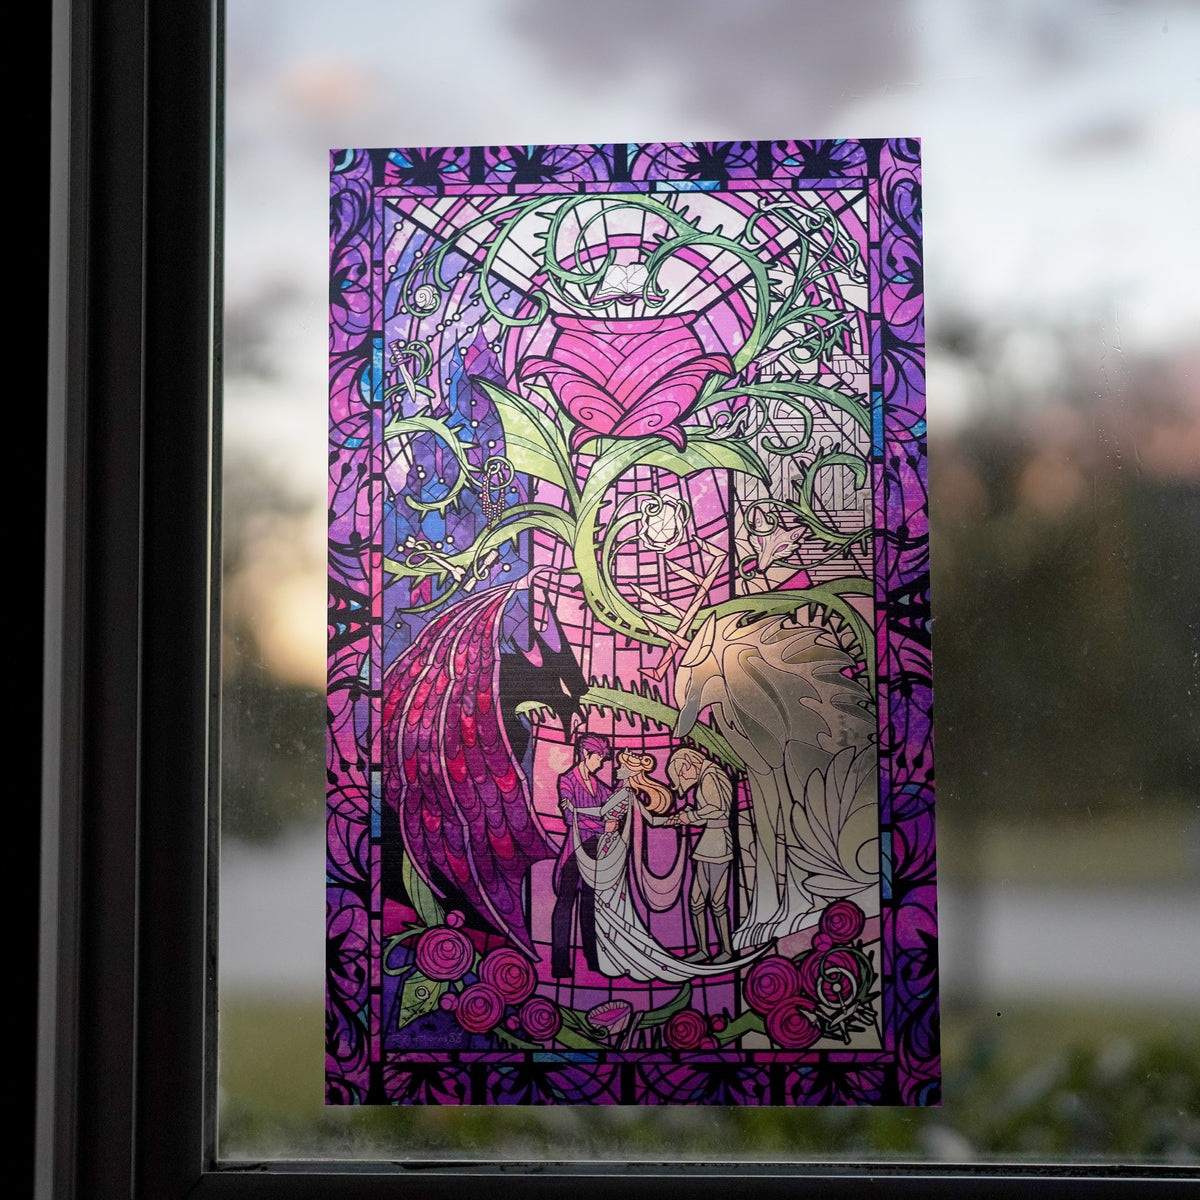 ACOTAR Window Cling is stained-glass-inspired art of Feyre and Tamlin wedding with Rhysand. Rose like Beauty and the Beast.